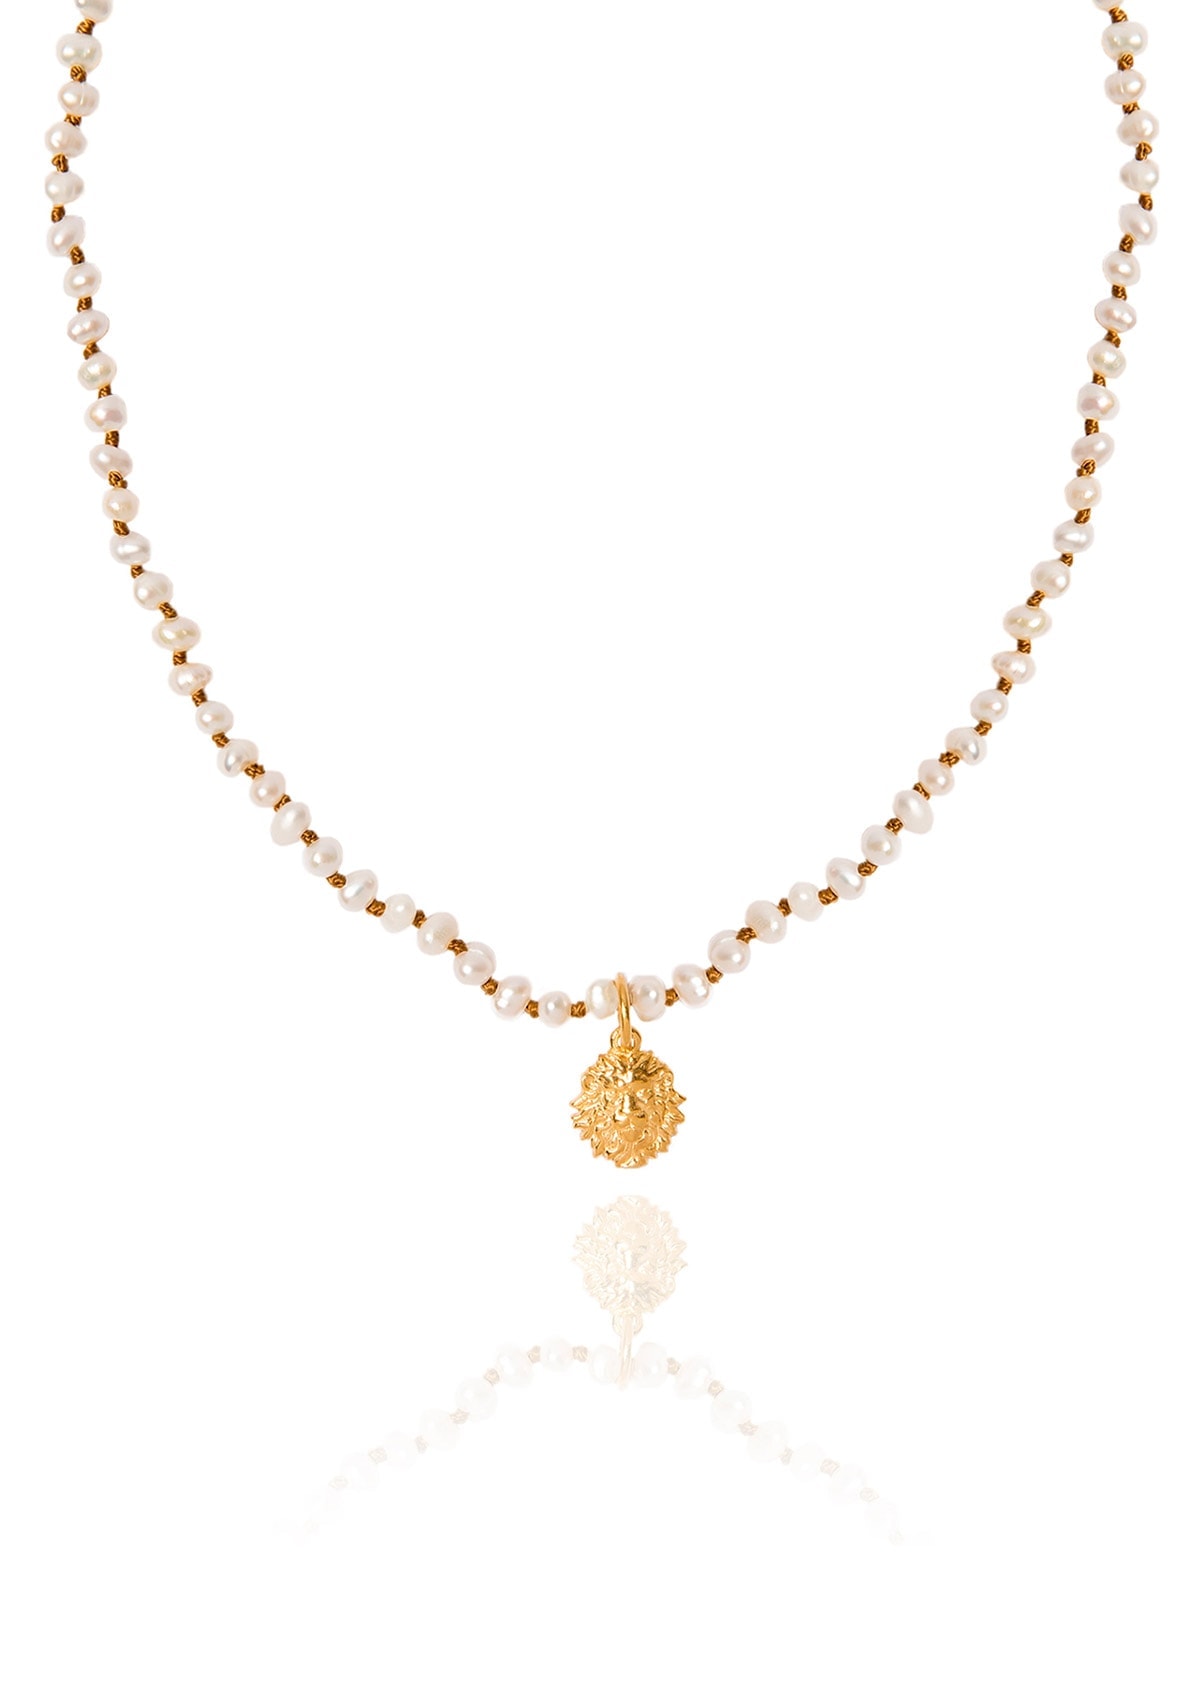 Wizard of Pearls Knotted Lion Necklace-Moca